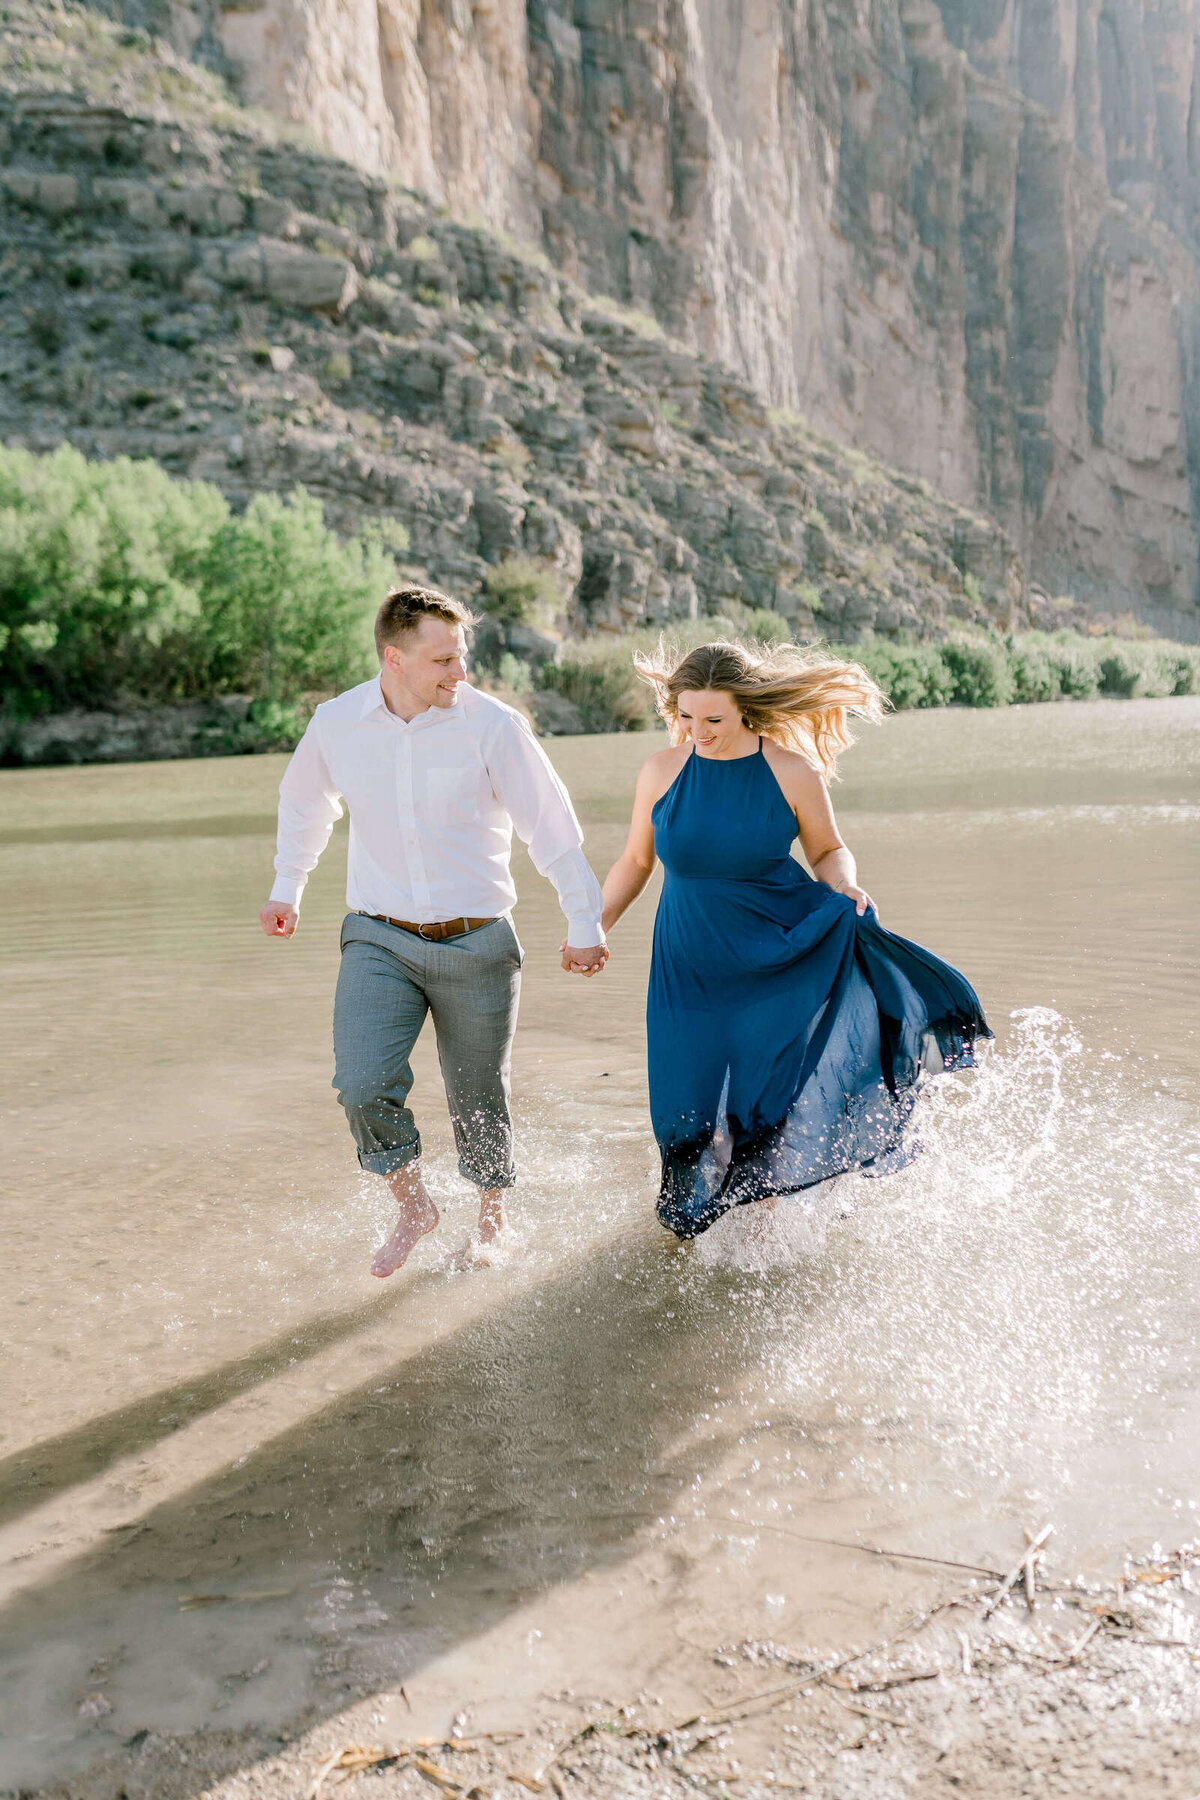 DFW Wedding Photographer Kate Panza_BigBend Engagement_Brittany_Carter_1194